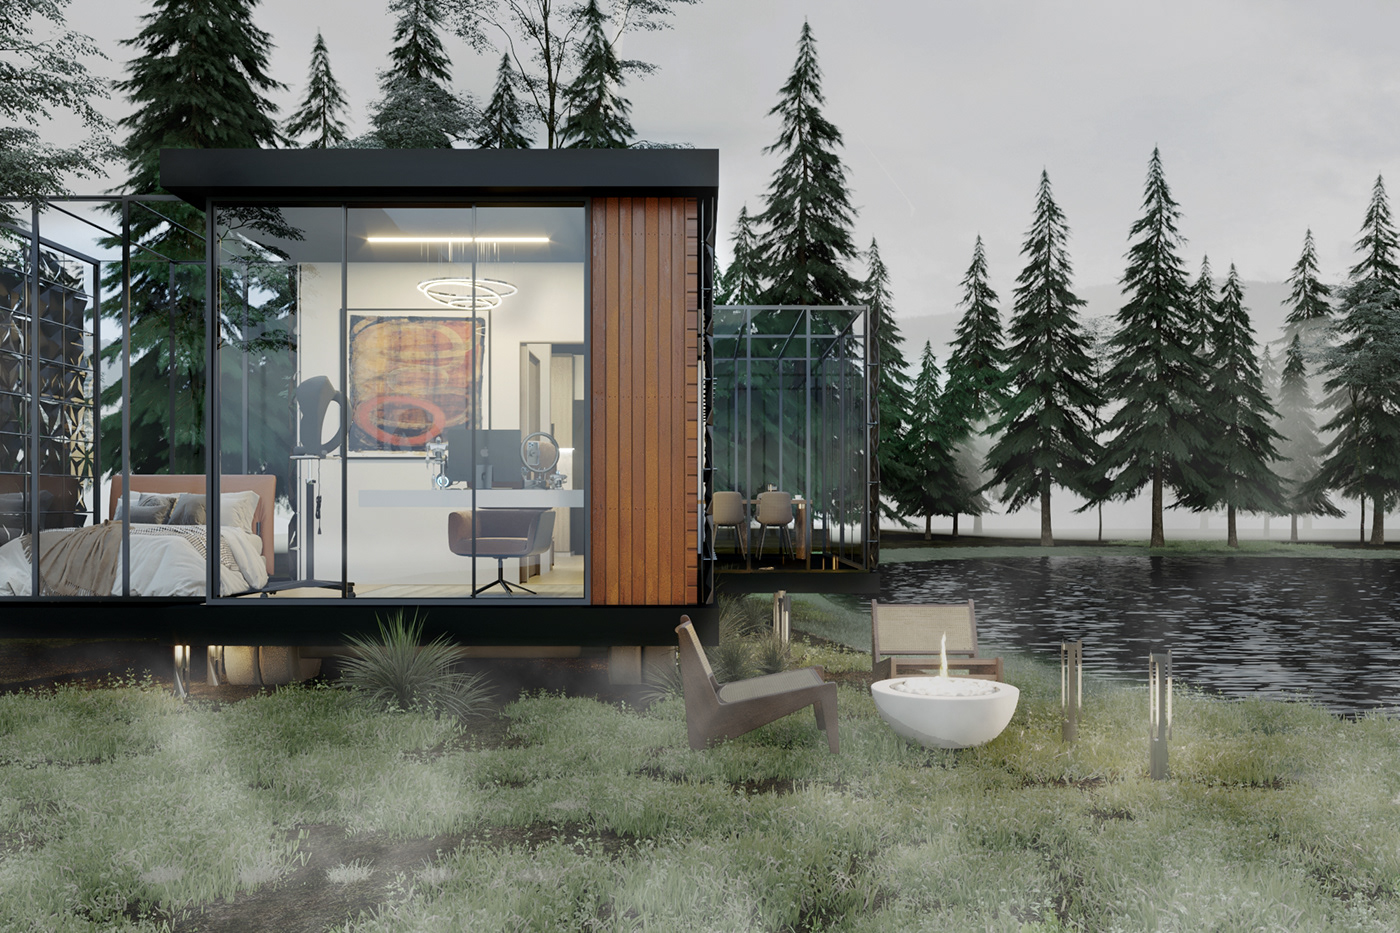 3ds max corona render  design Dynamic foresthouse lakehouse Smallhouse tiny house